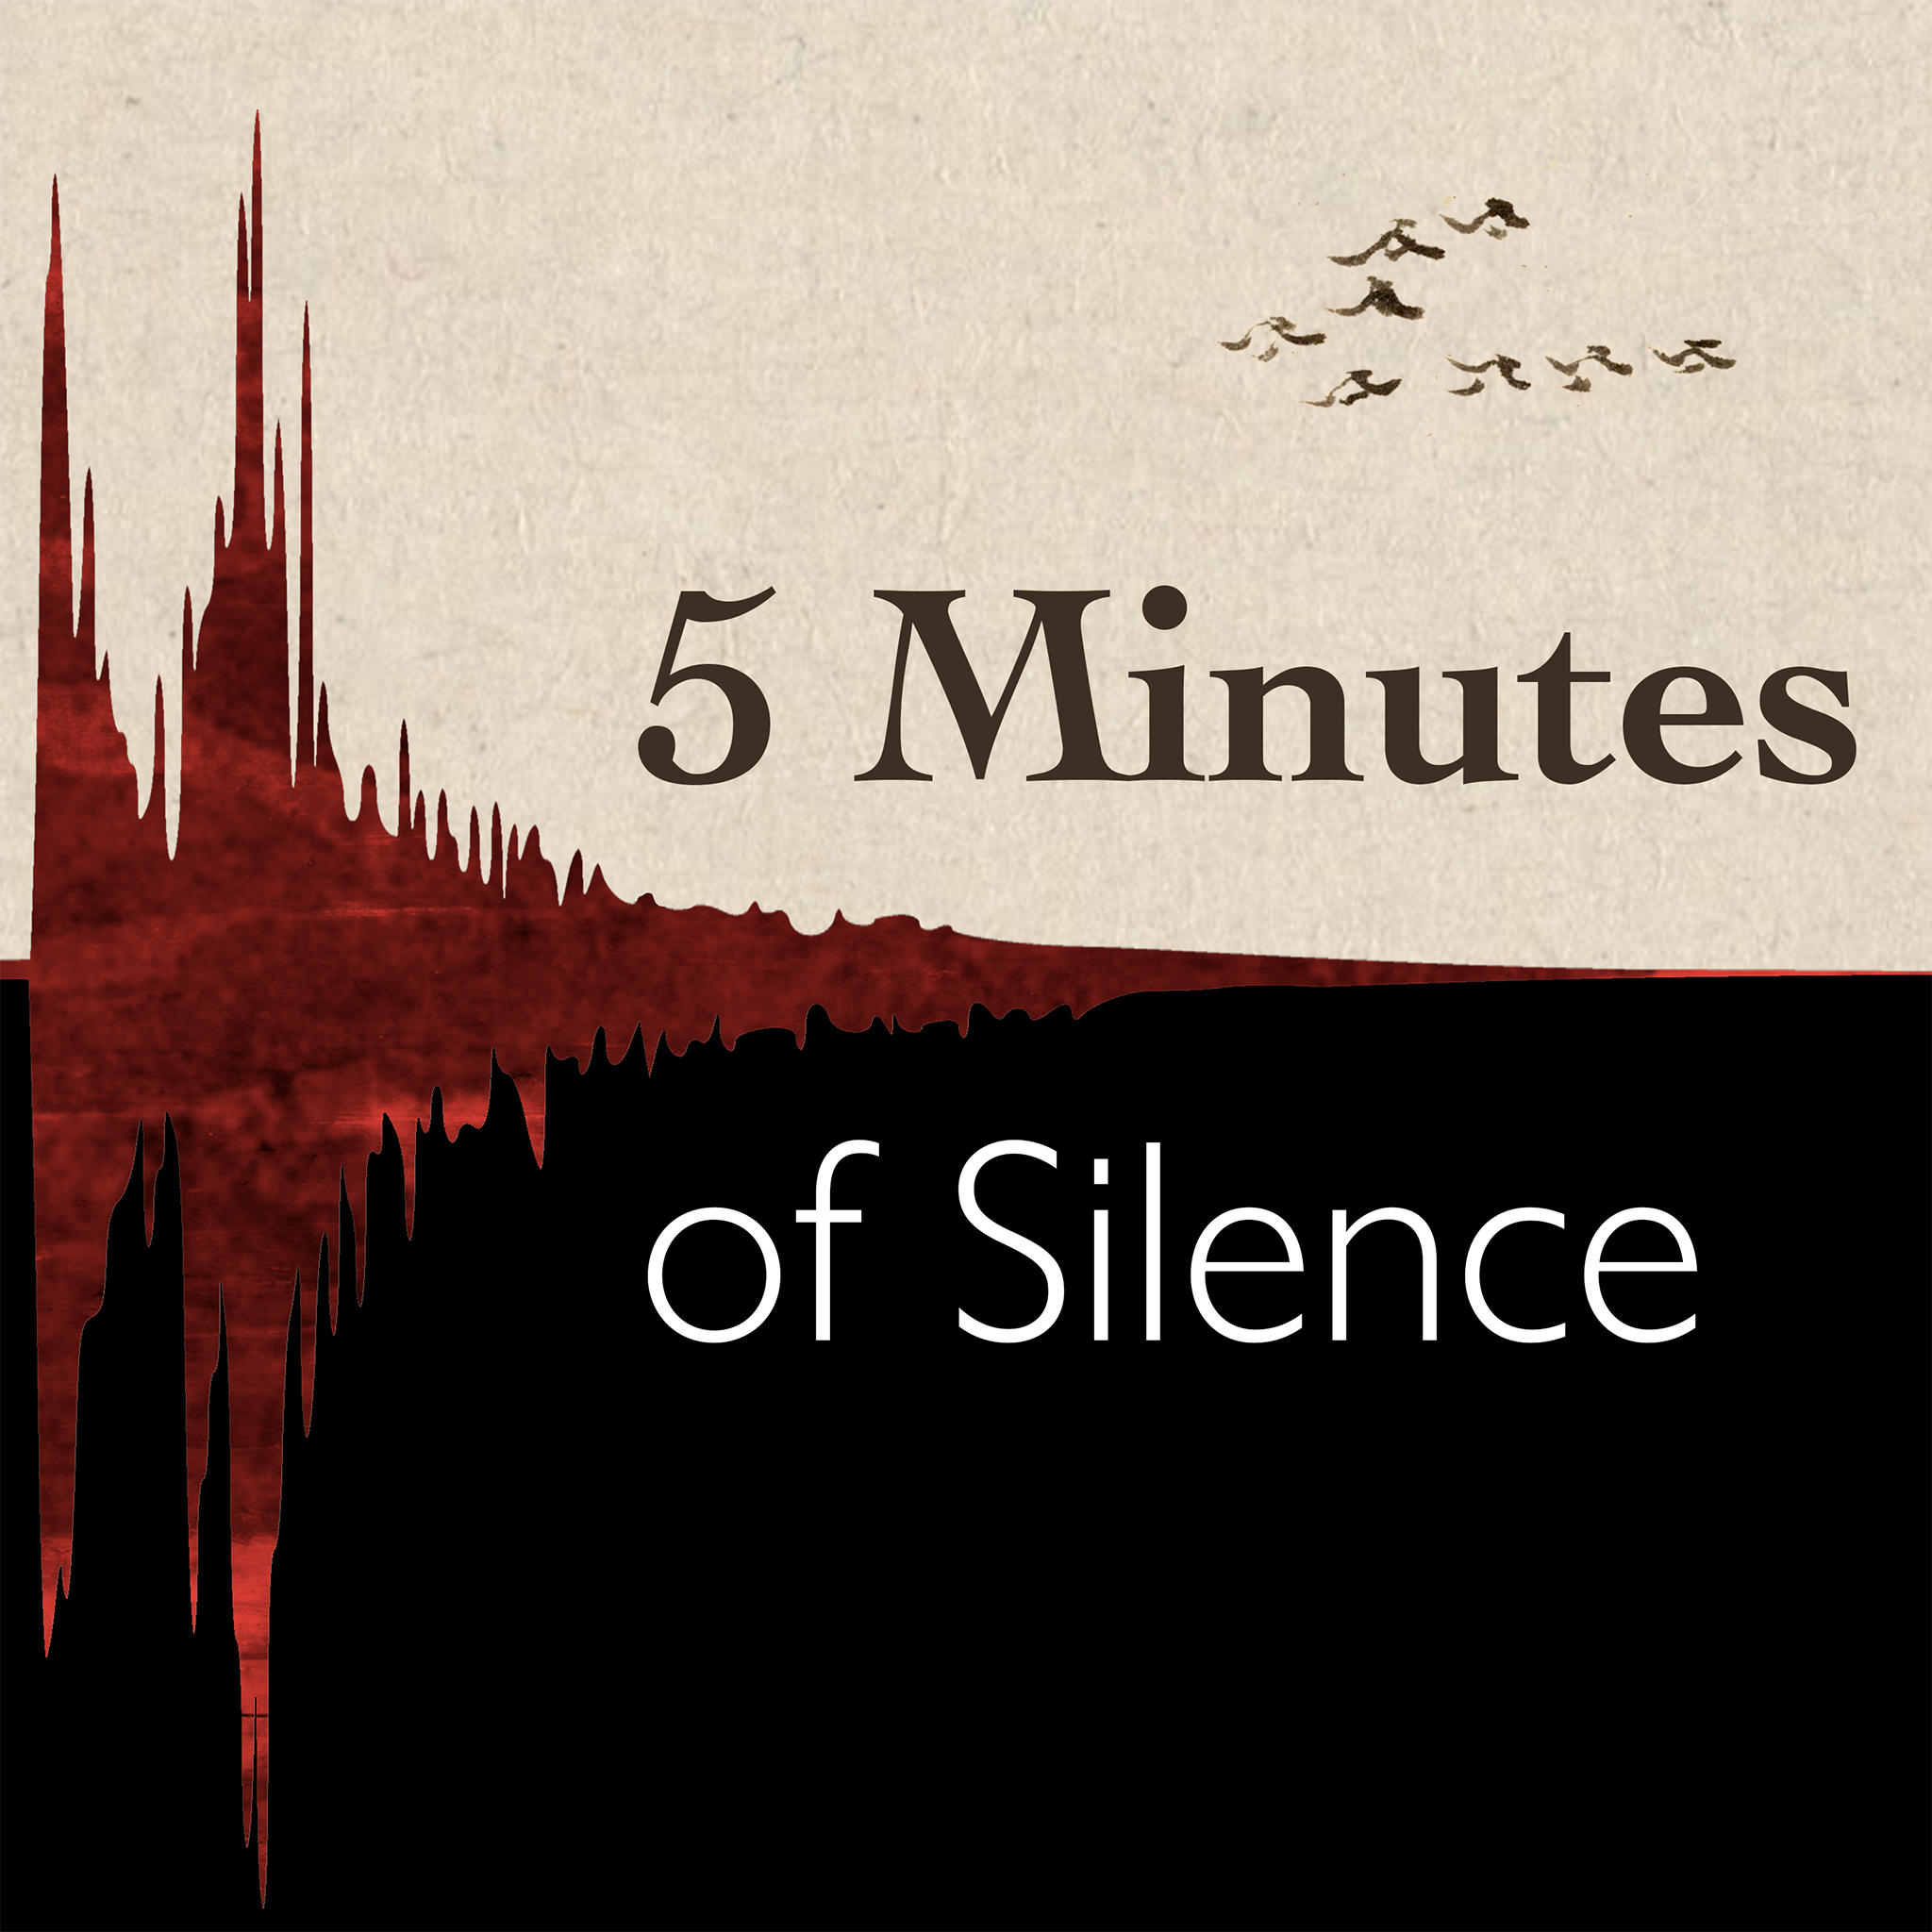 5 Minutes of Silence